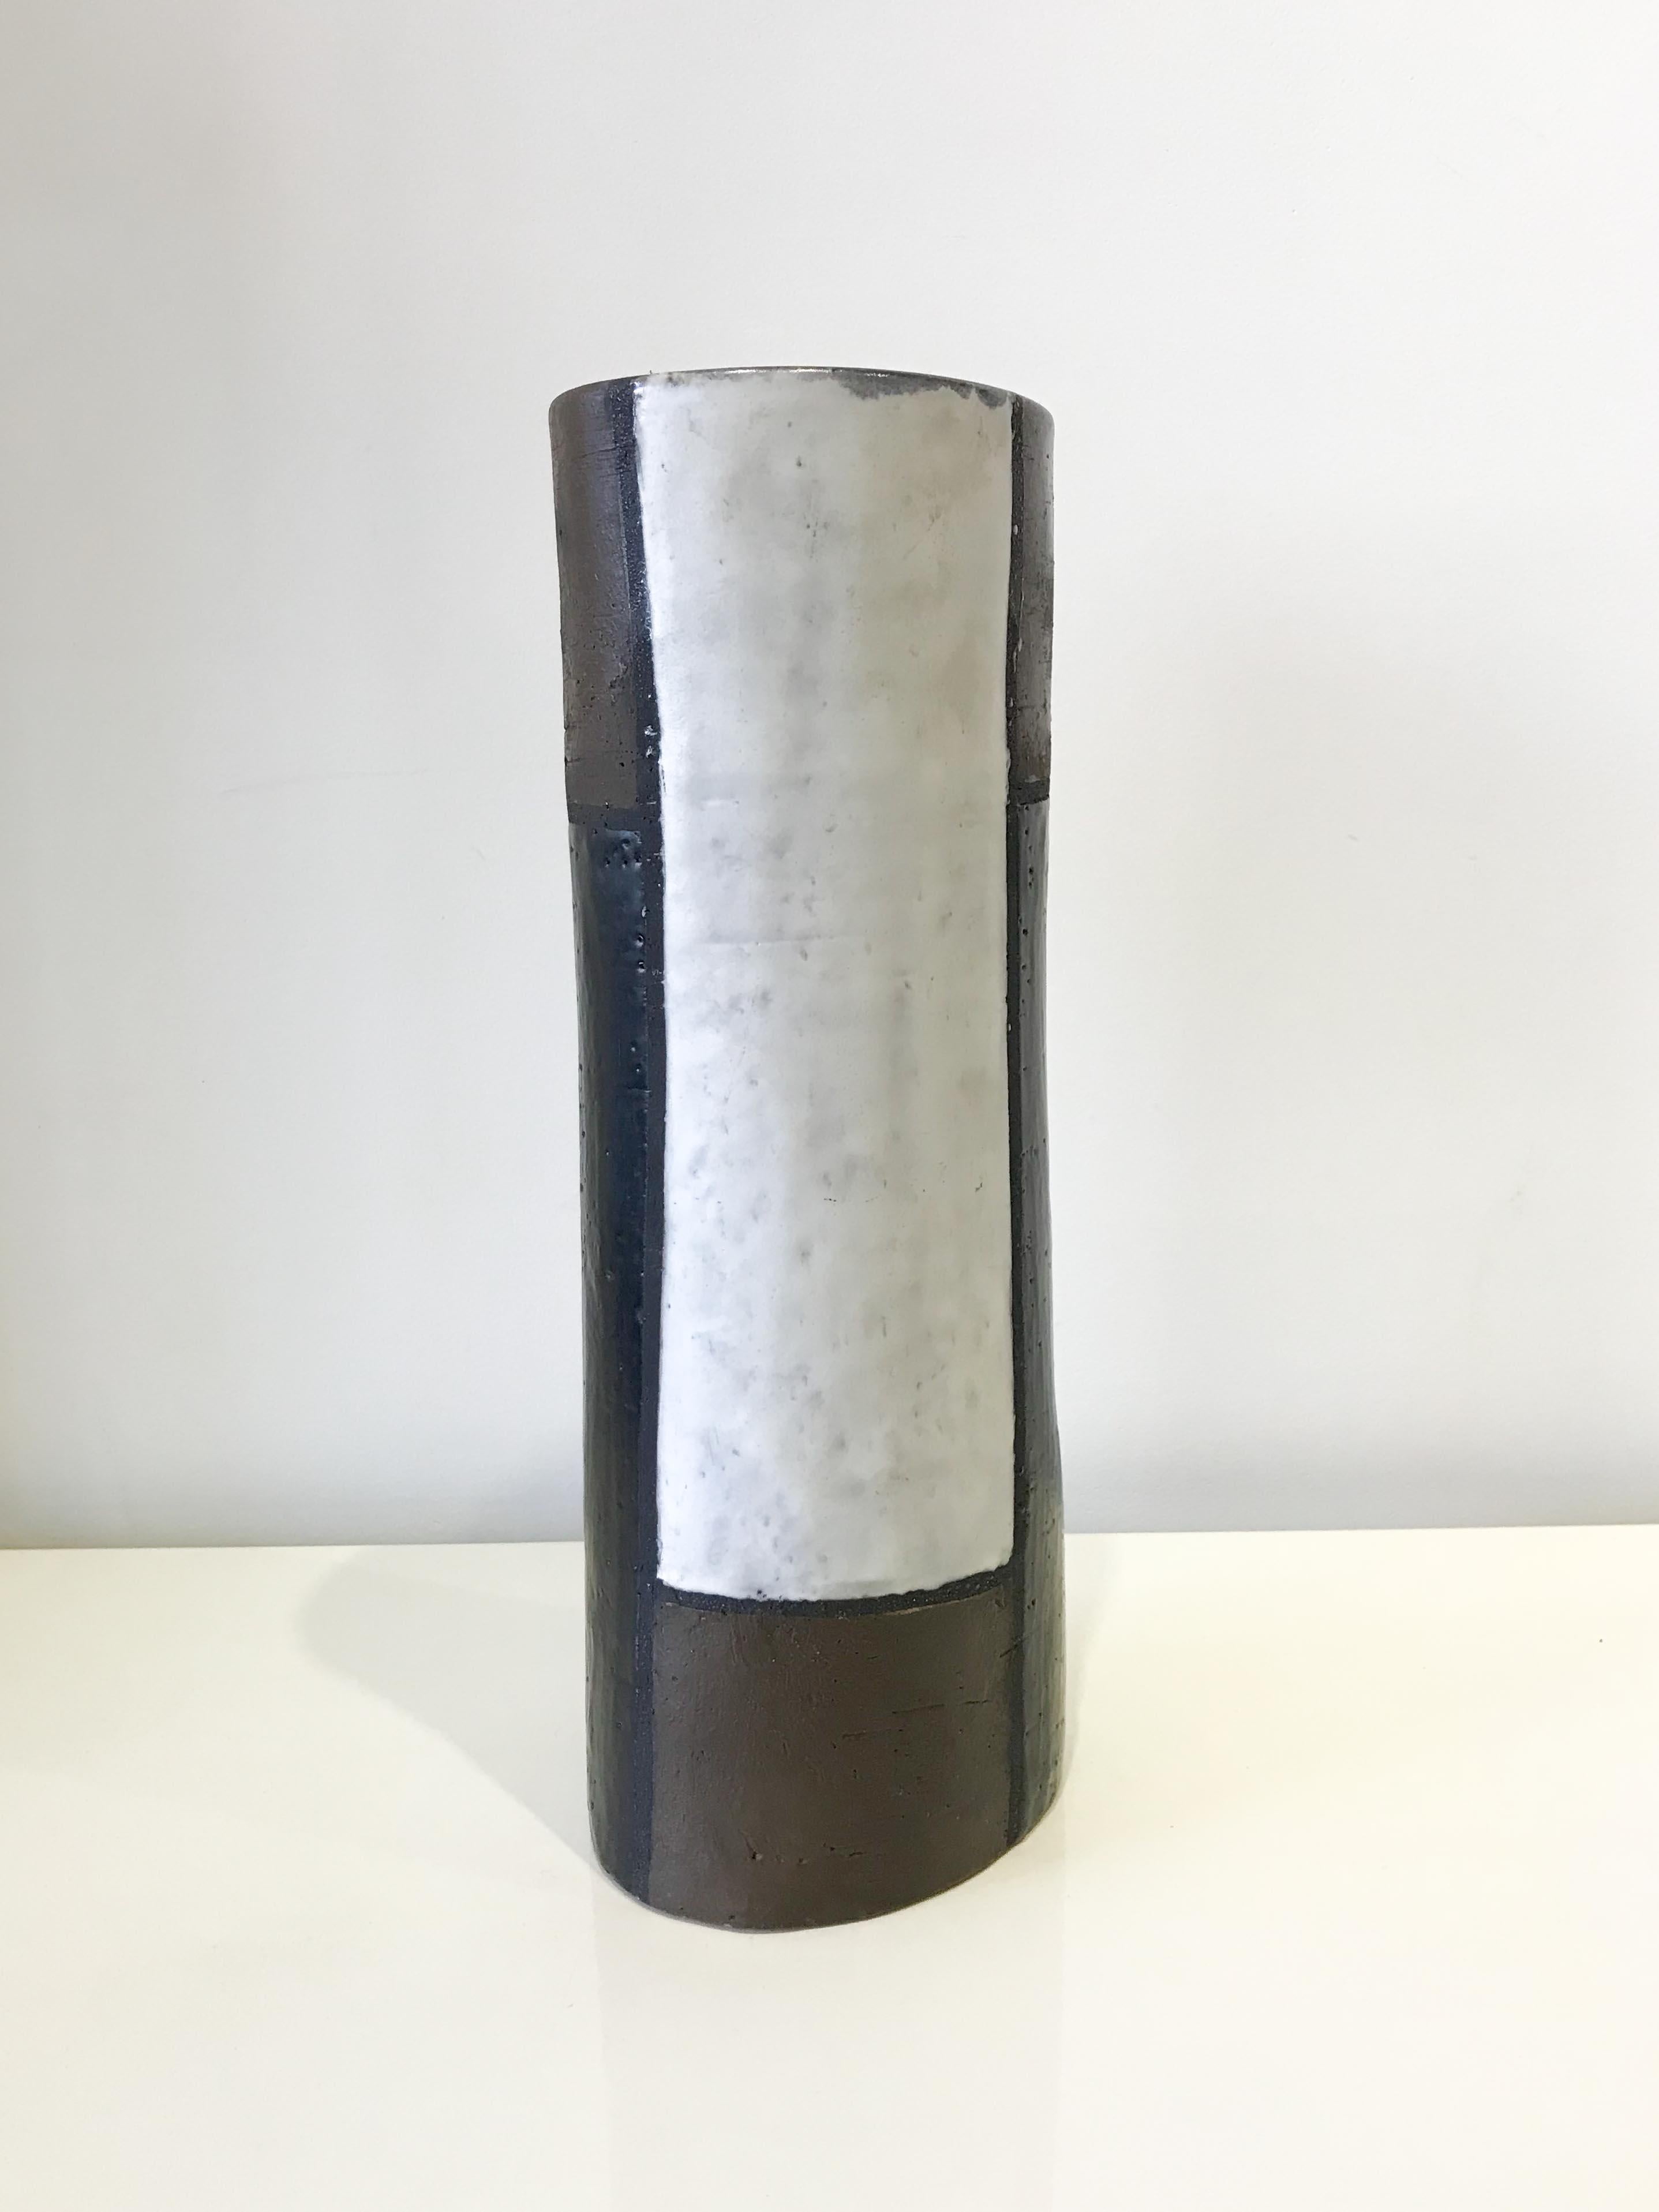 The iconic Mondrian vase by Aldo Londi for Bitossi. From 1946-1996 Londi was artistic director for Bitossi, during this time he created thousands of designs for decorative vases, jugs, animals and candle sticks. 

Excellent overall condition with